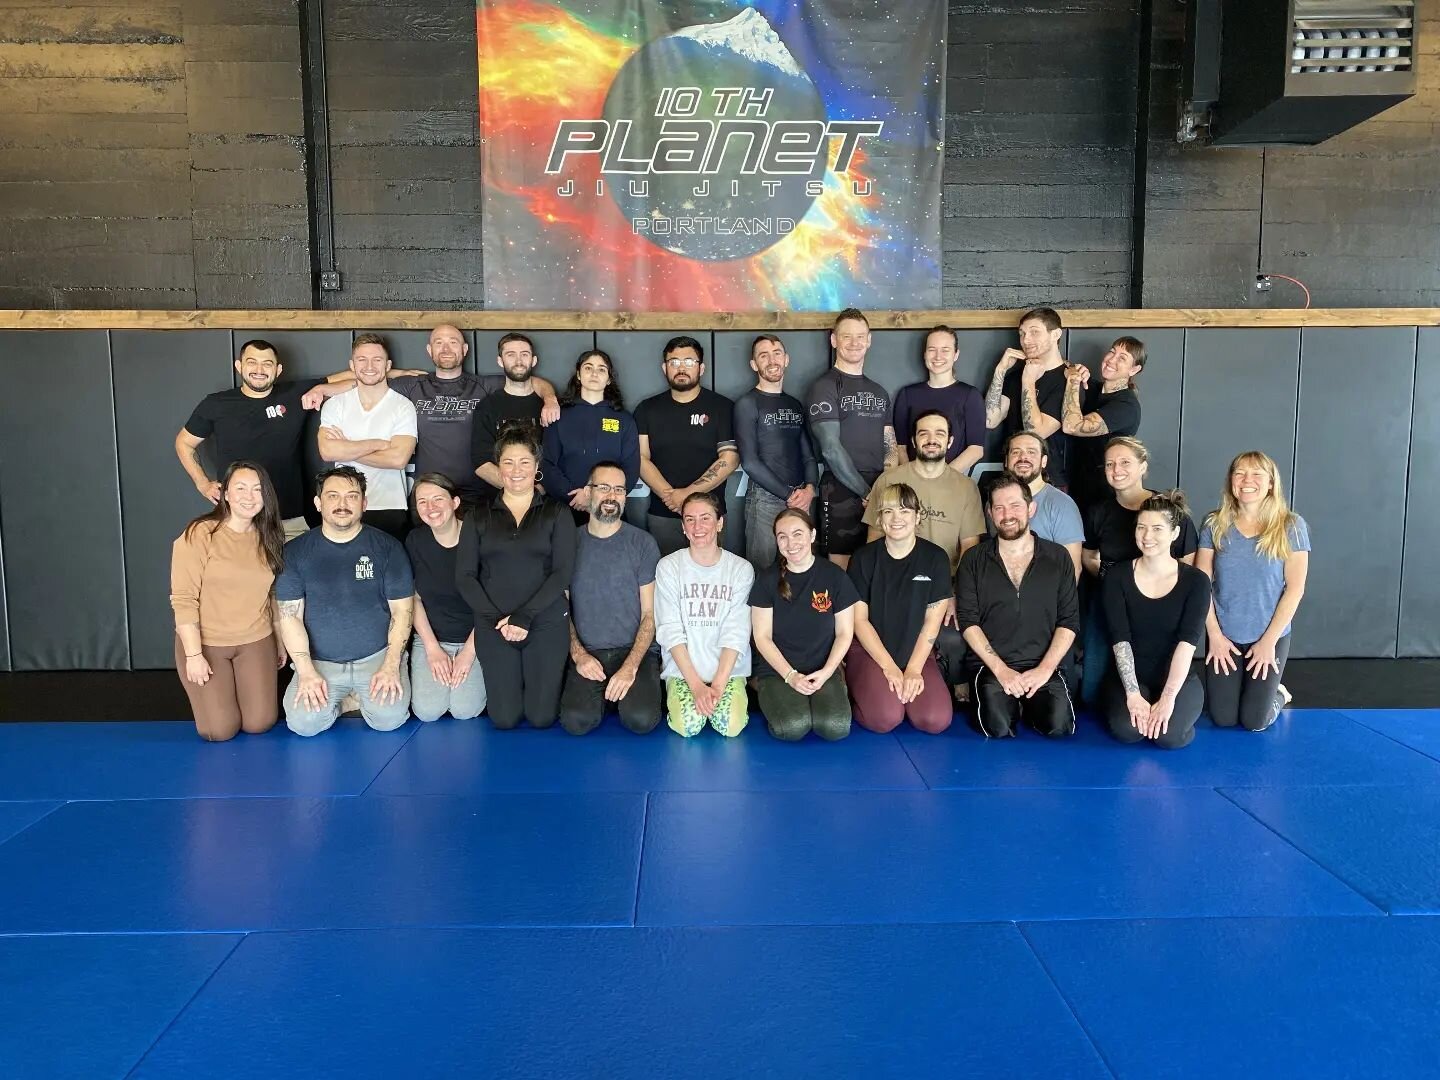 We got a bunch of our team together today for some self defence training!! Big thanks to @10thplanetportland for hosting us and sharing their knowledge with us. &hearts;️